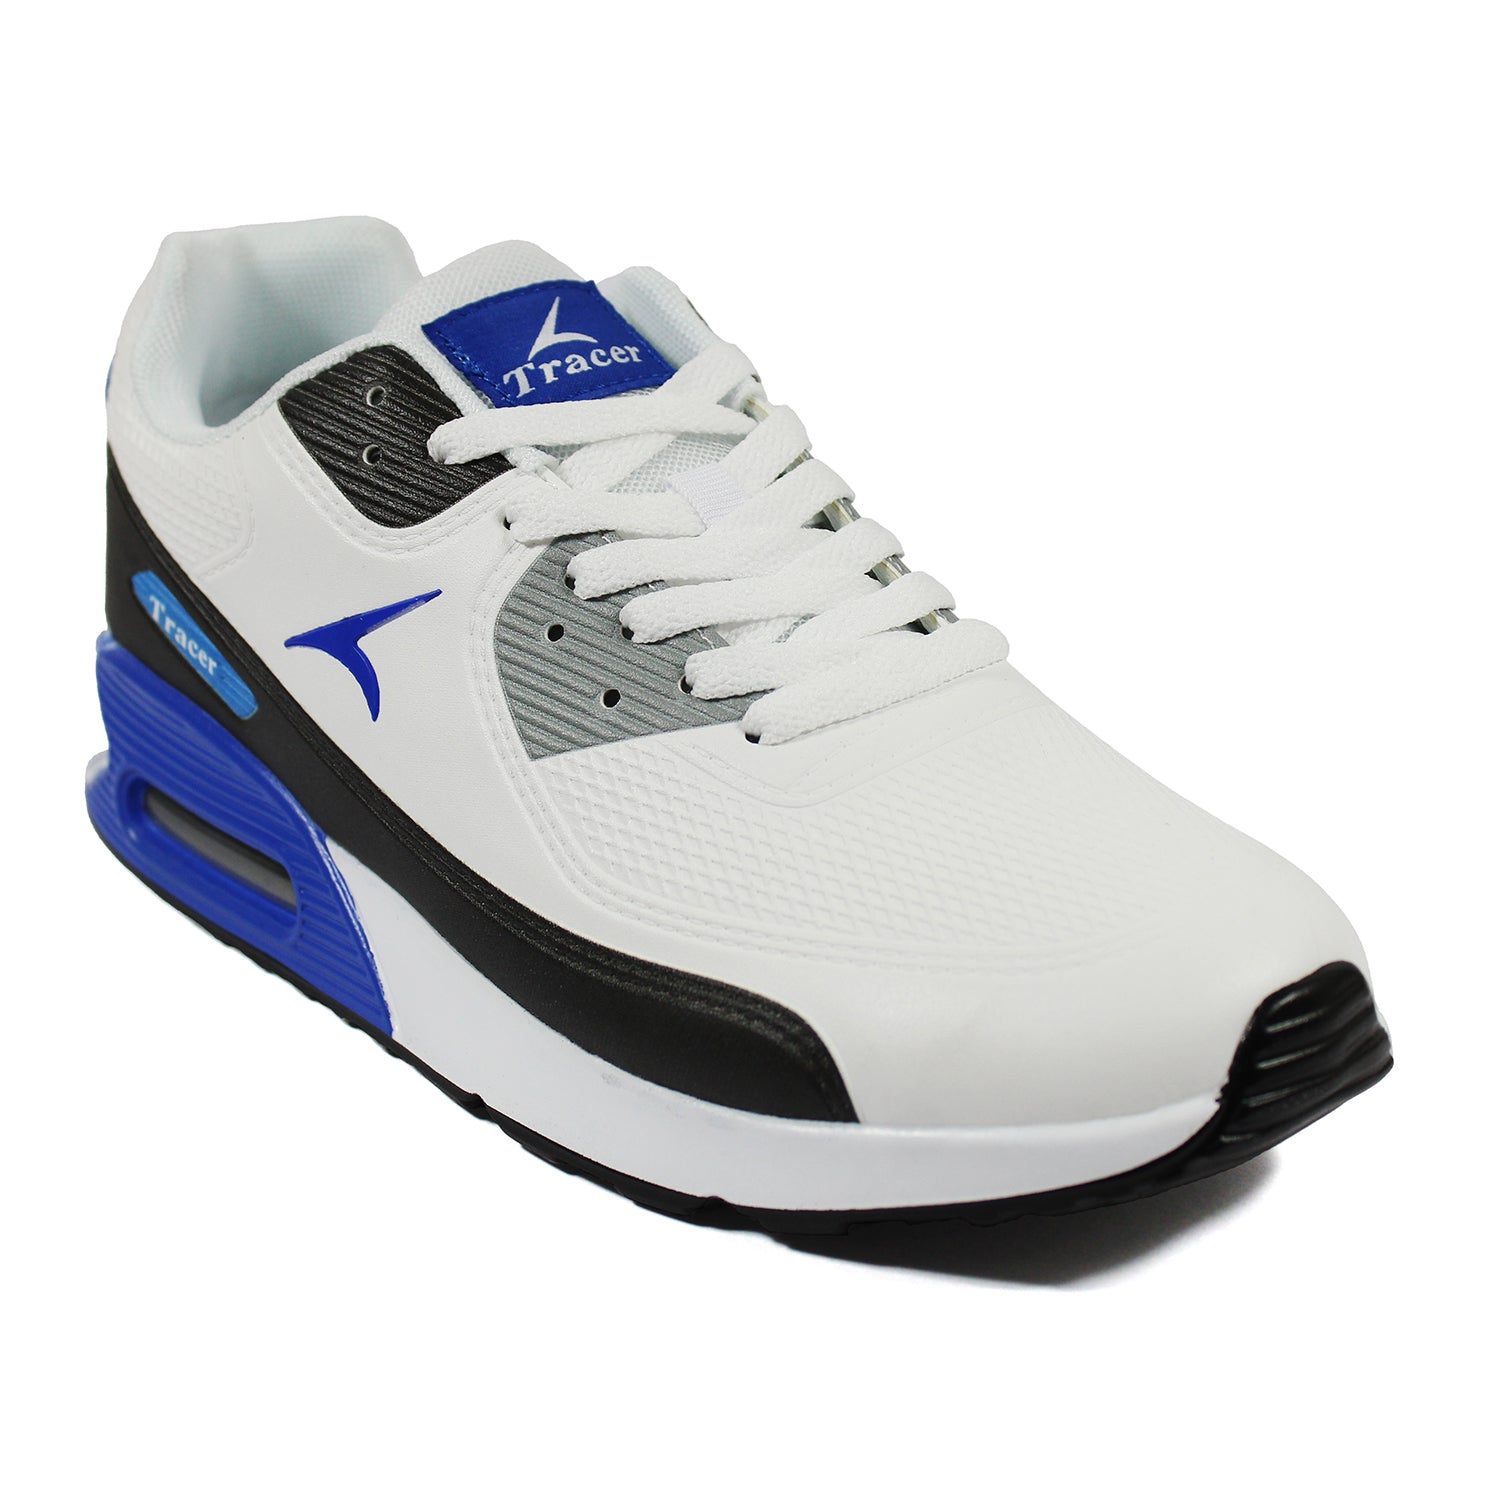 Tracer Shoes | White R Blue | Men's Collection